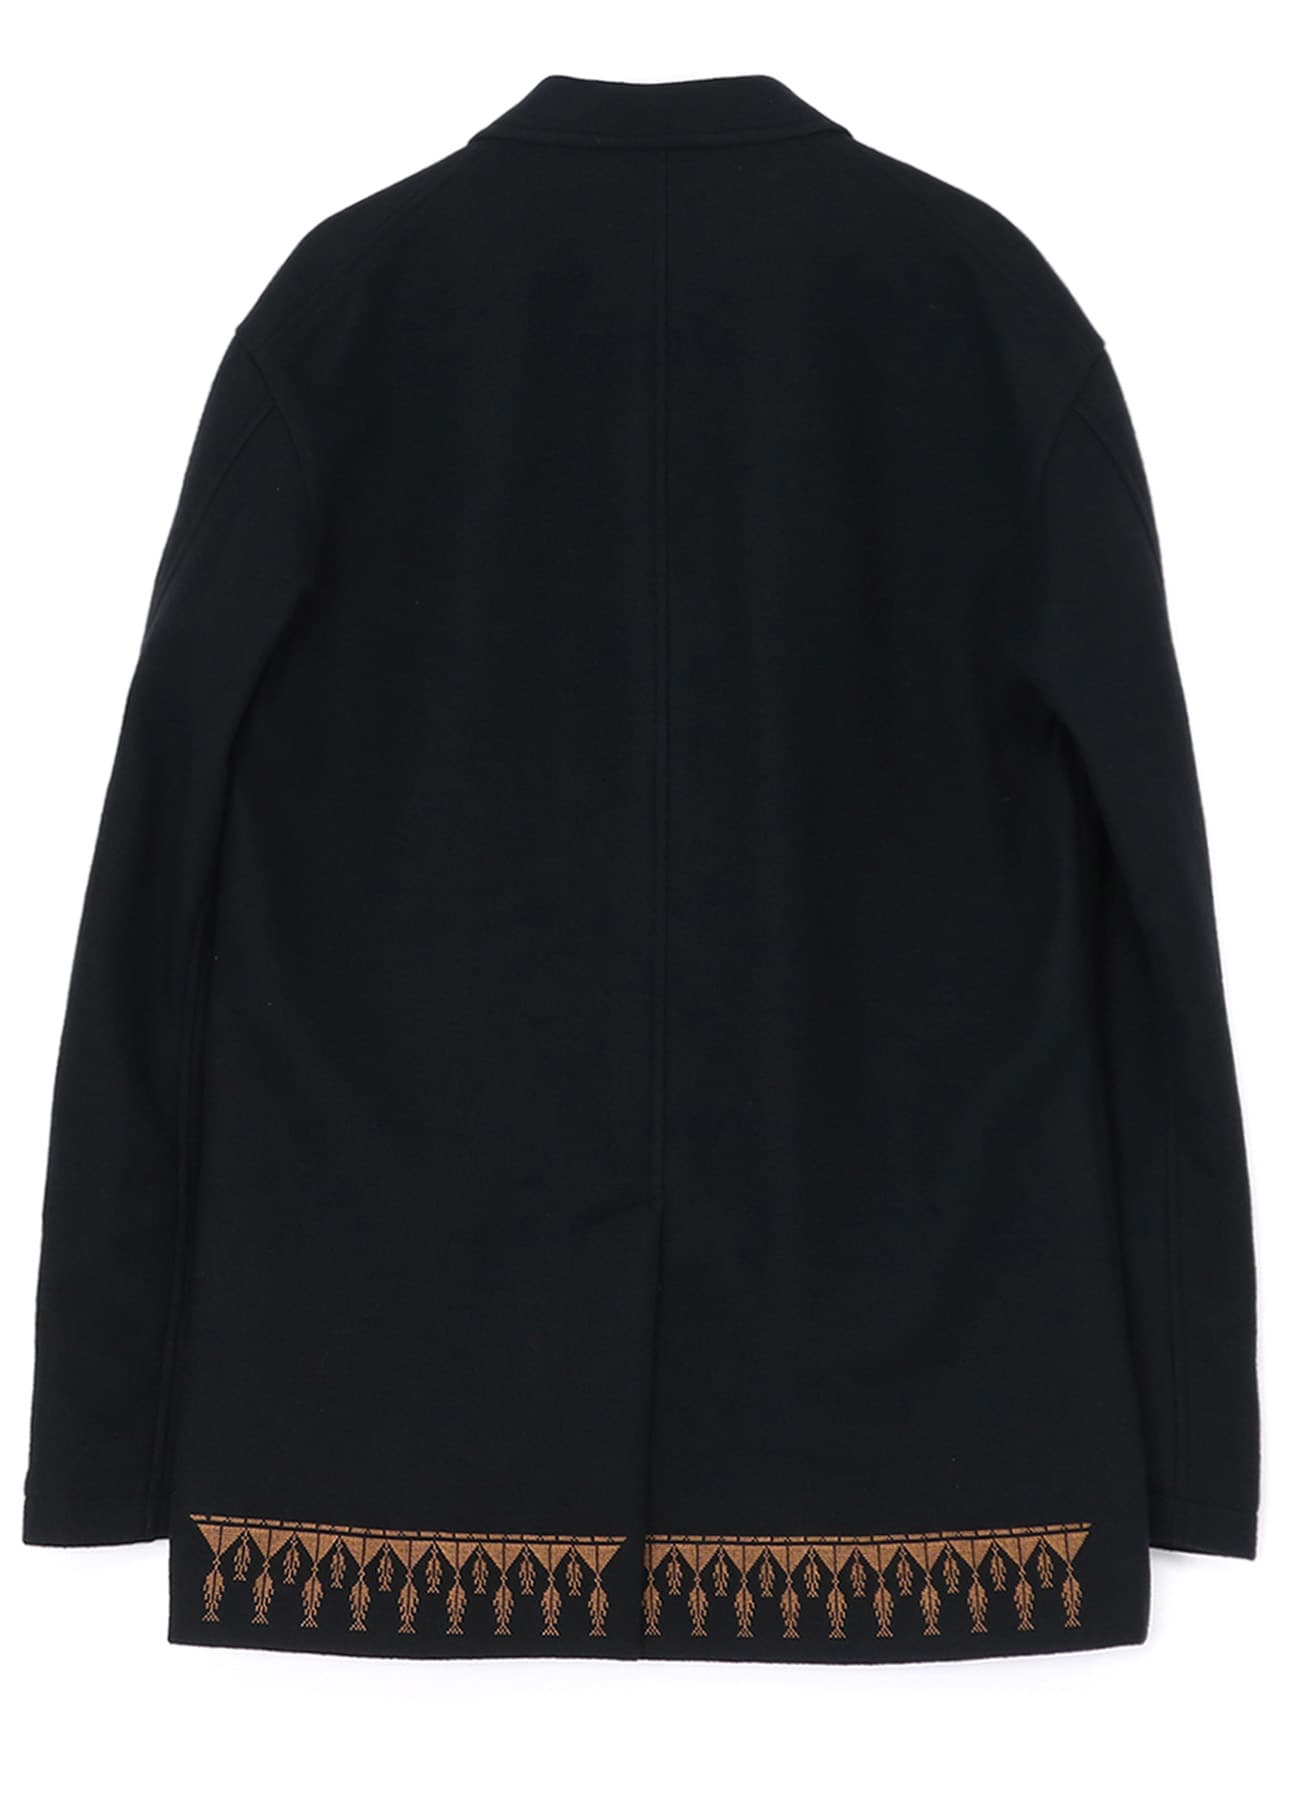 COMPRESSED JERSEY ETHNIC EMBROIDERED JACKET(M Black): S'YTE｜THE 